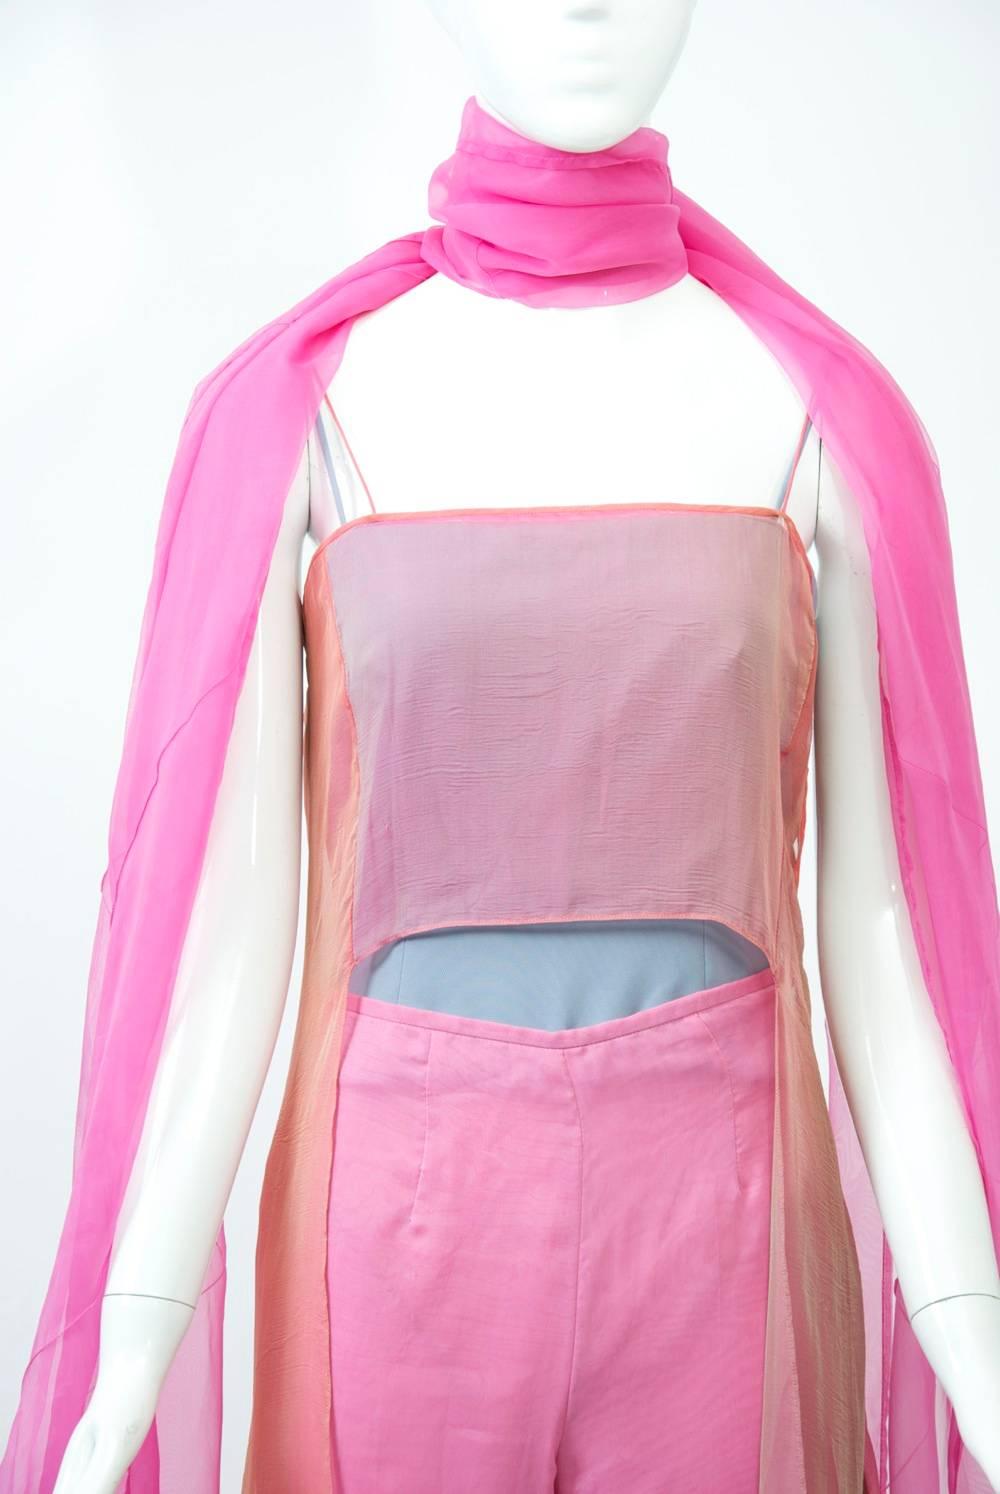 1990s Armani rainbow pants ensemble composed of four pieces - pink pants, a blue bustier/bodysuit, a rainbow asymmetric tunic, and a pink scarf. The pants, with side zipper, are made of two sheer silk layers on top and one heavier fabric underneath.